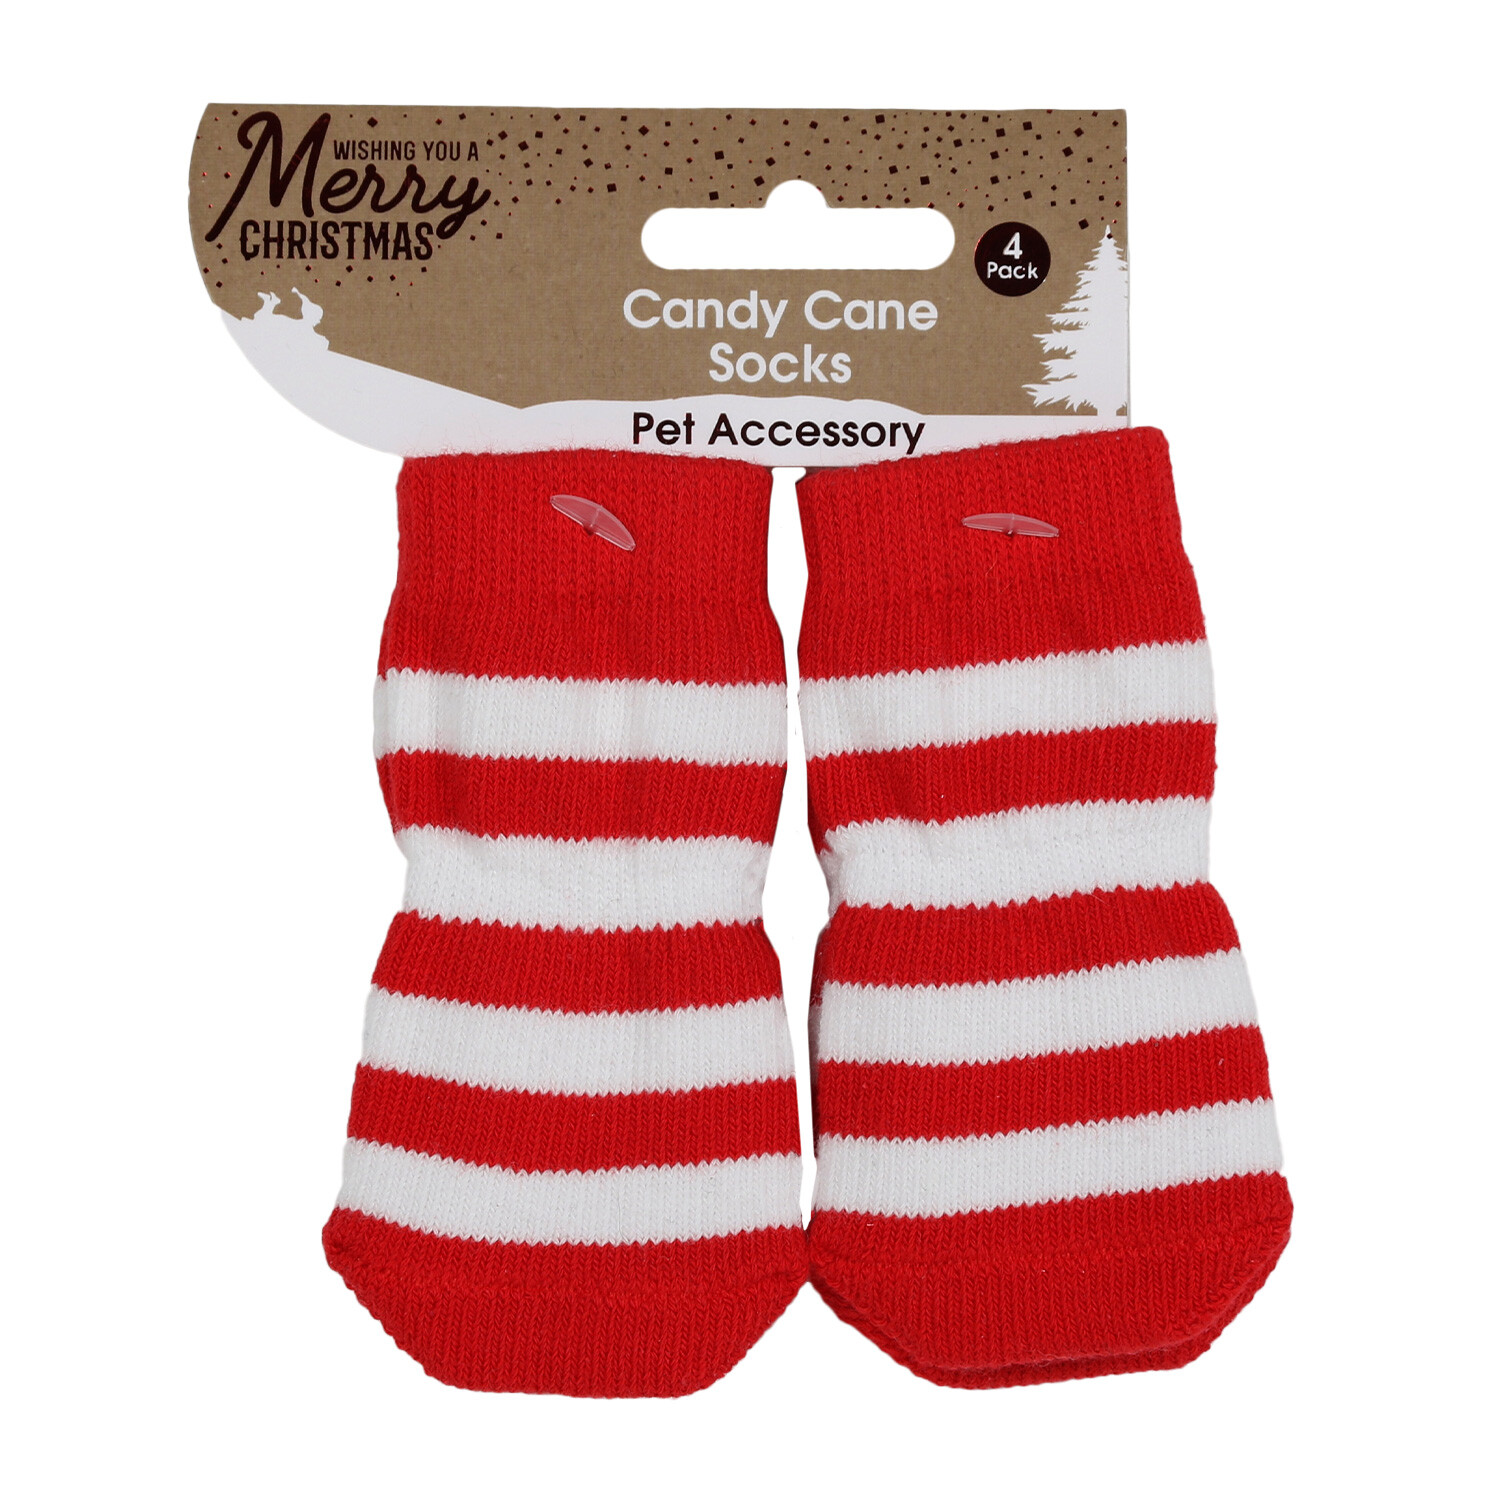 Candy Cane Pet Socks - Red Image 2